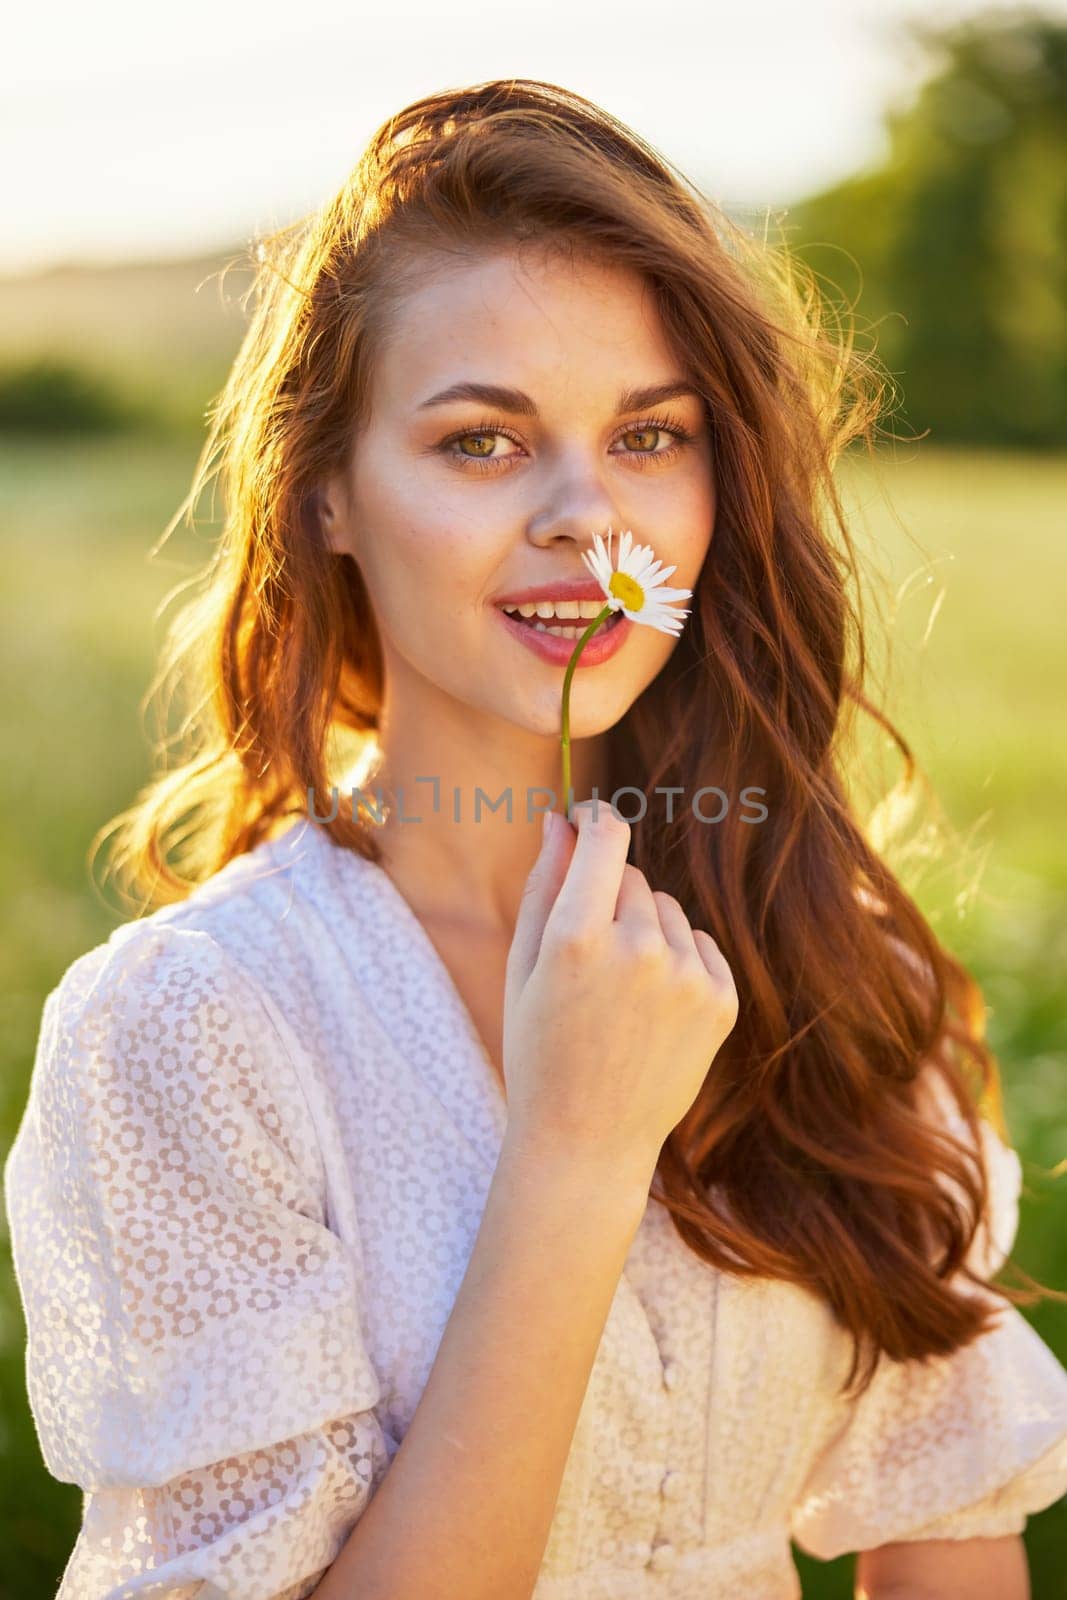 close portrait of a beautiful, laughing woman in a light dress holding a camomile near her face by Vichizh